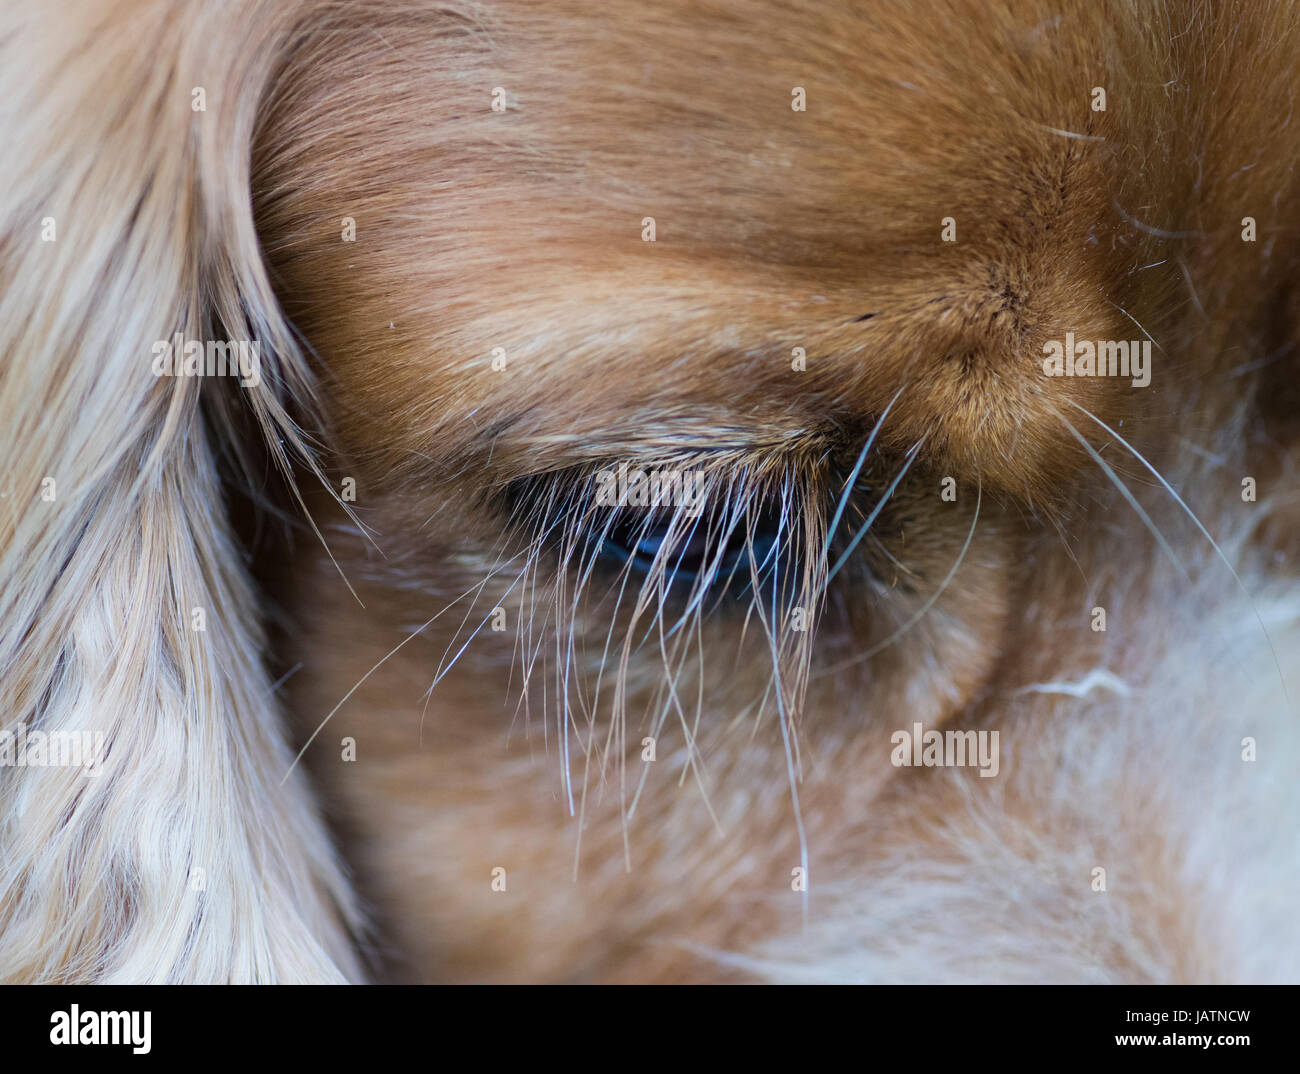 The eye and eye lashes of a sprocker Stock Photo